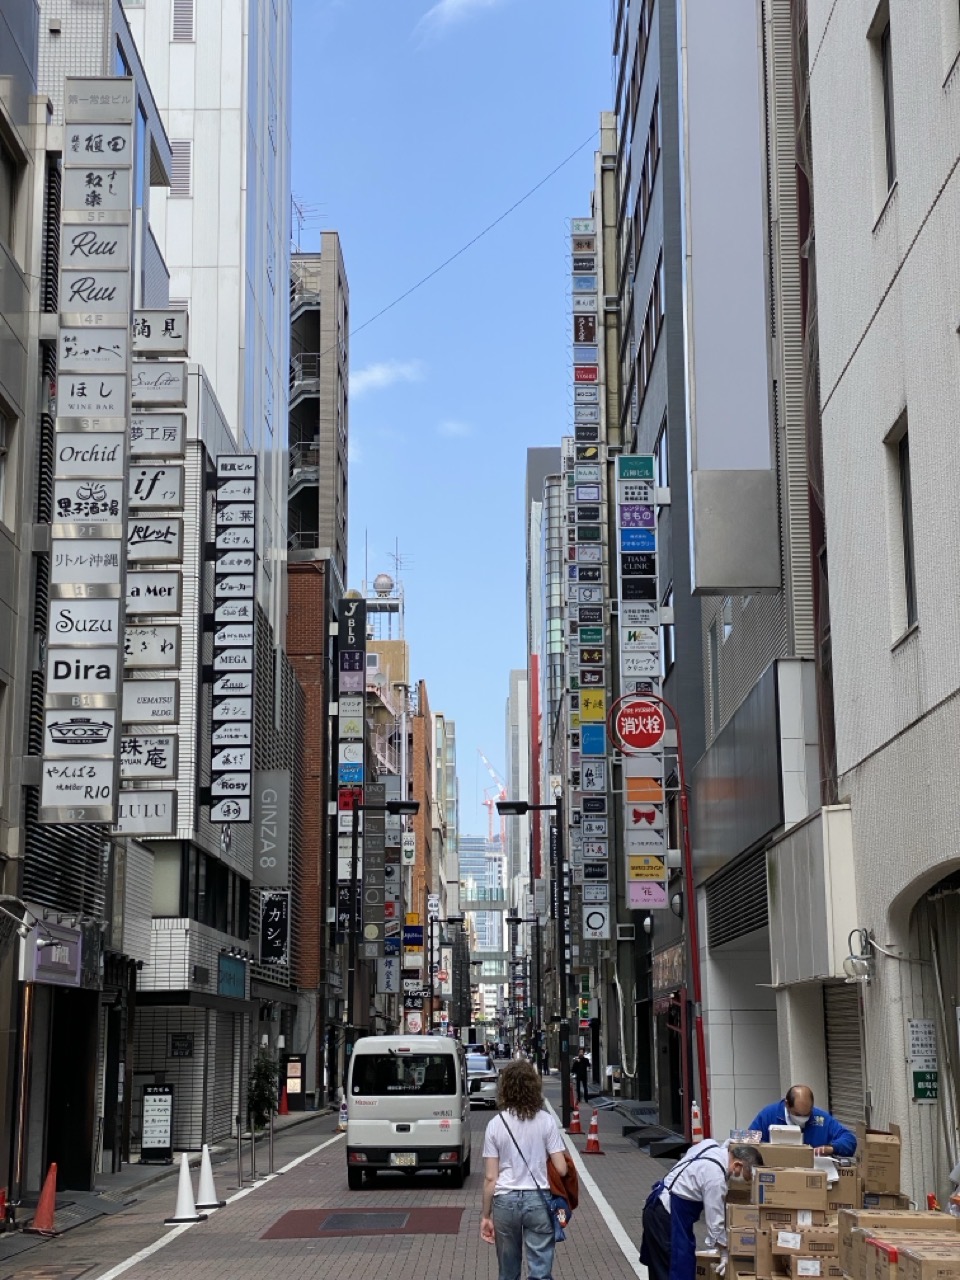 A street in Ginza with lots of signs. Lucy is, again, in the foreground.